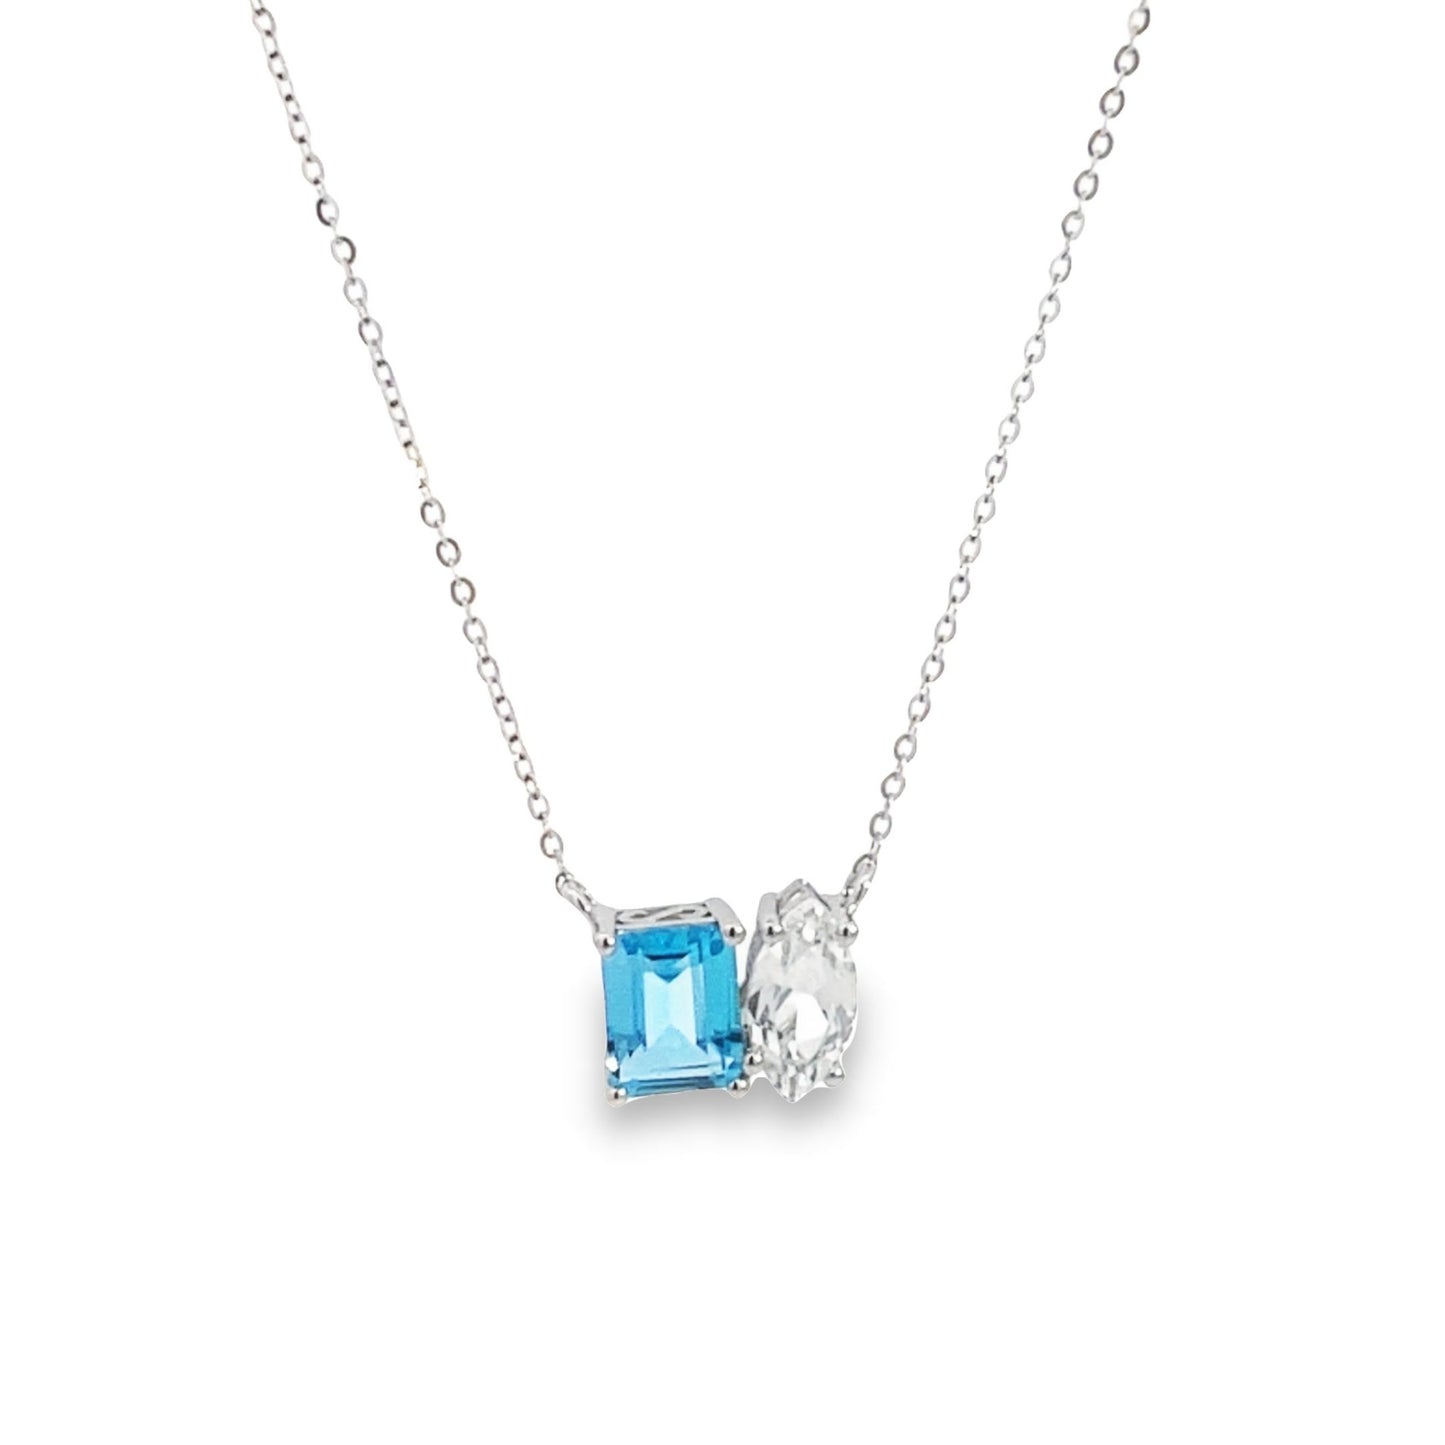 Luvente | 14K Gold Geometric Blue and White Topaz Pendant Necklace